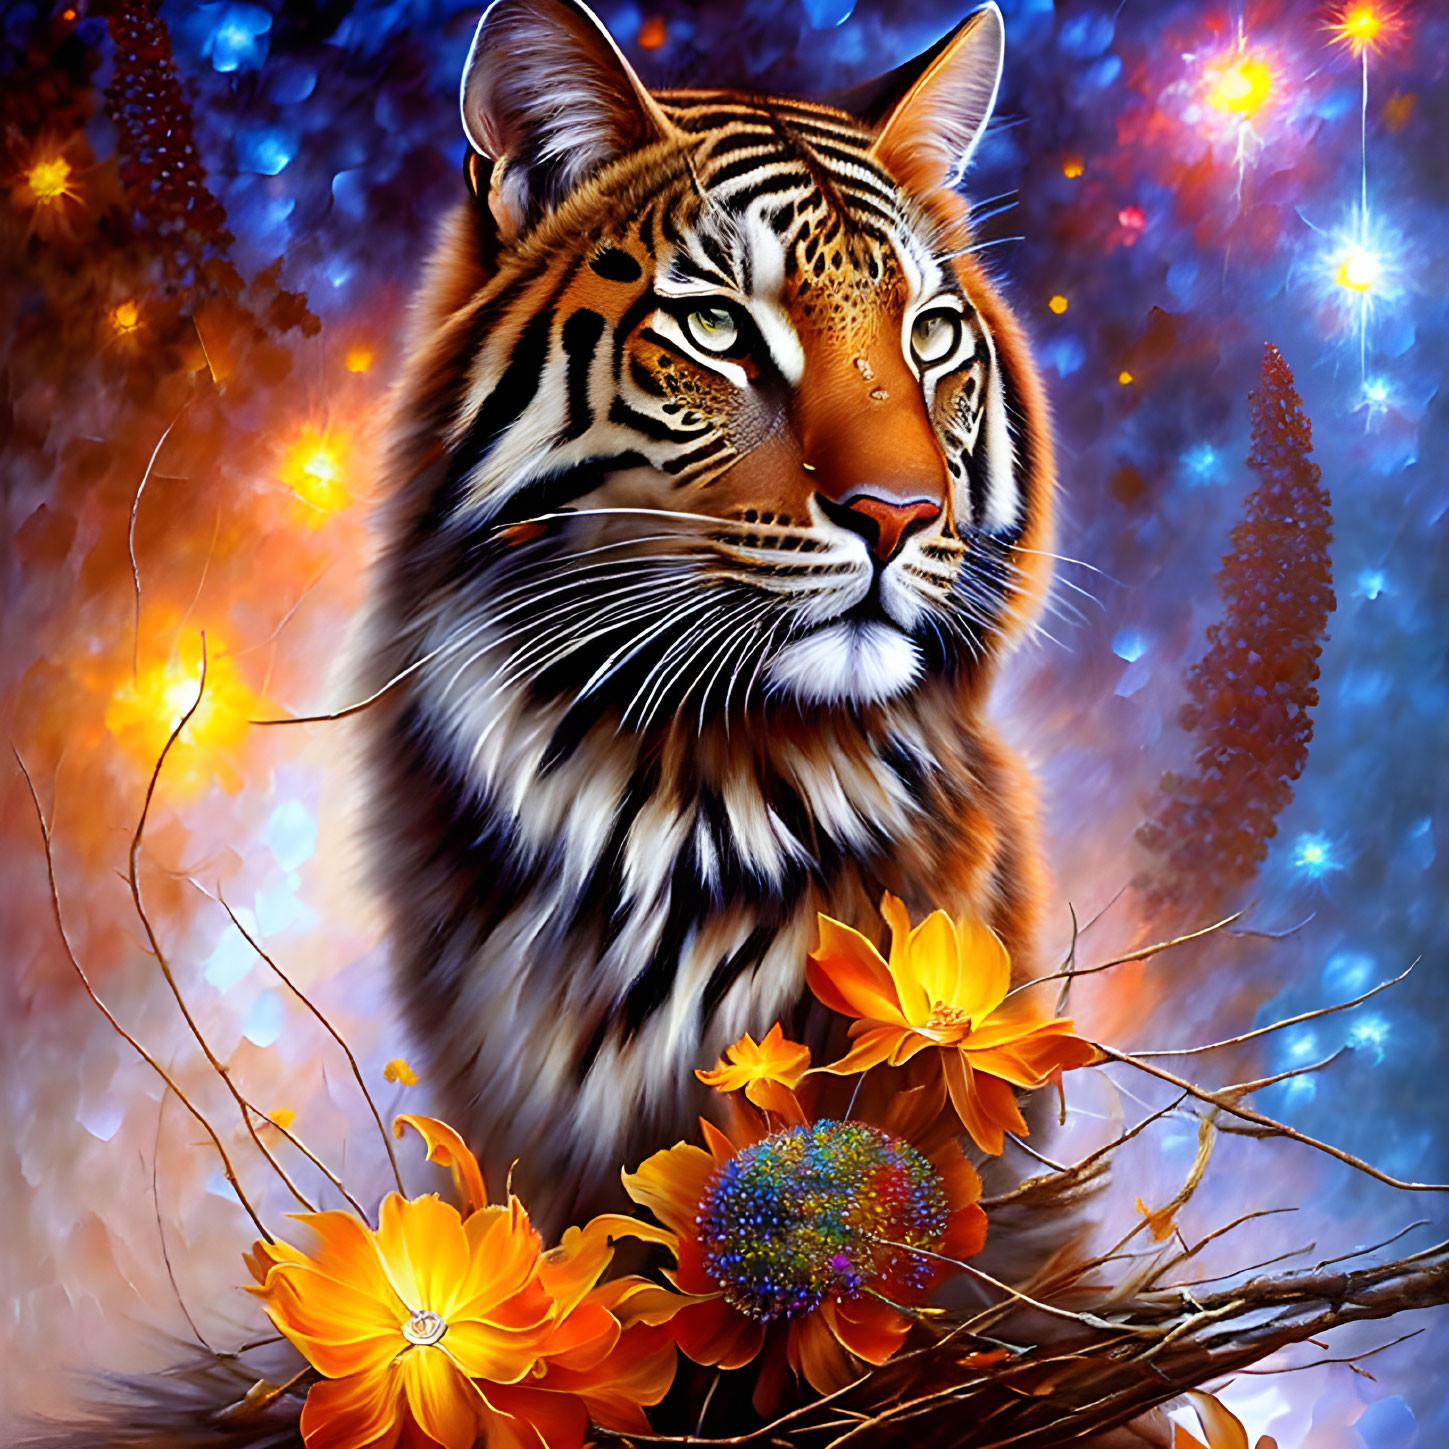 Detailed Tiger Illustration Surrounded by Flowers on Mystical Blue Background